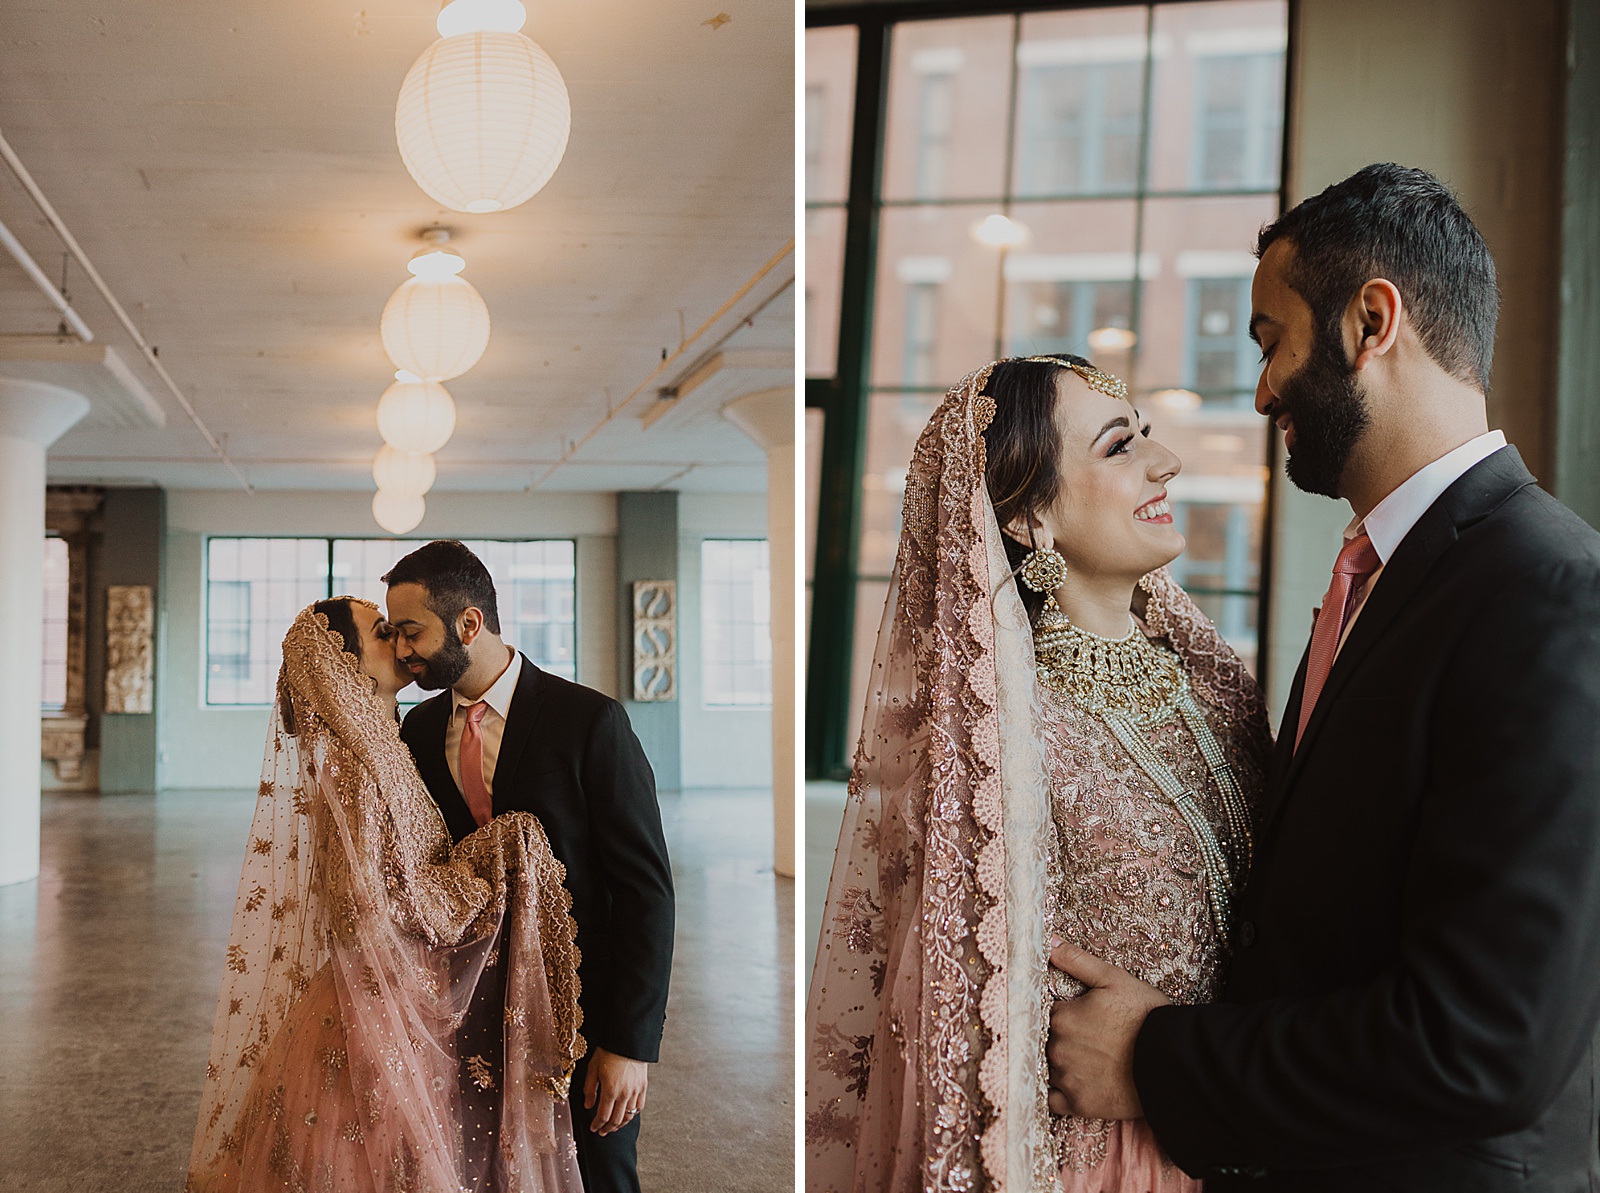 Non traditional Indian wedding in St Louis Missouri captured by Caitlyn Cloud Photography